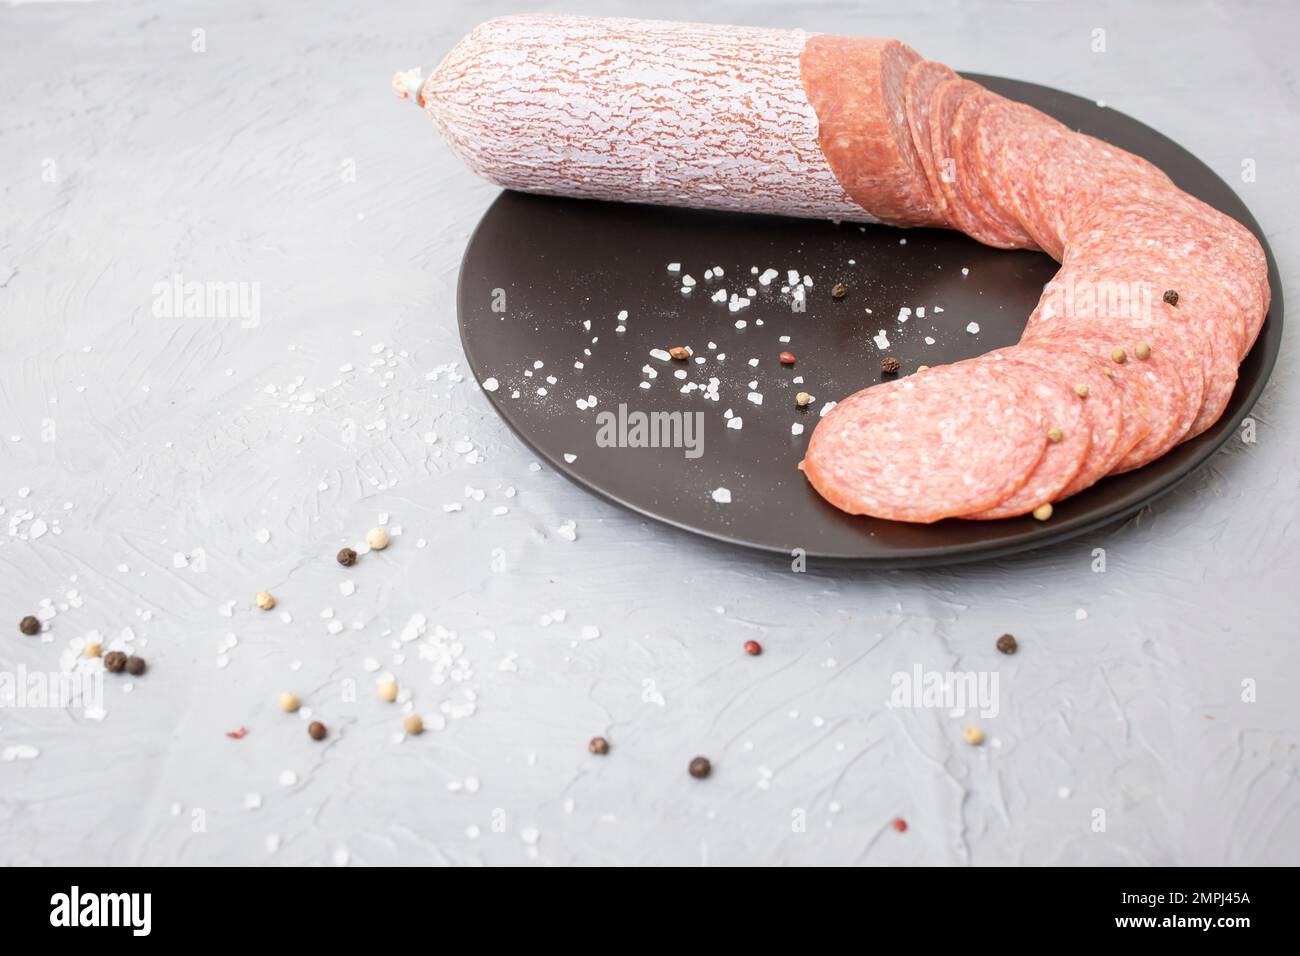 Thin sliced salami on a ceramic black plate, on cement table Stock Photo